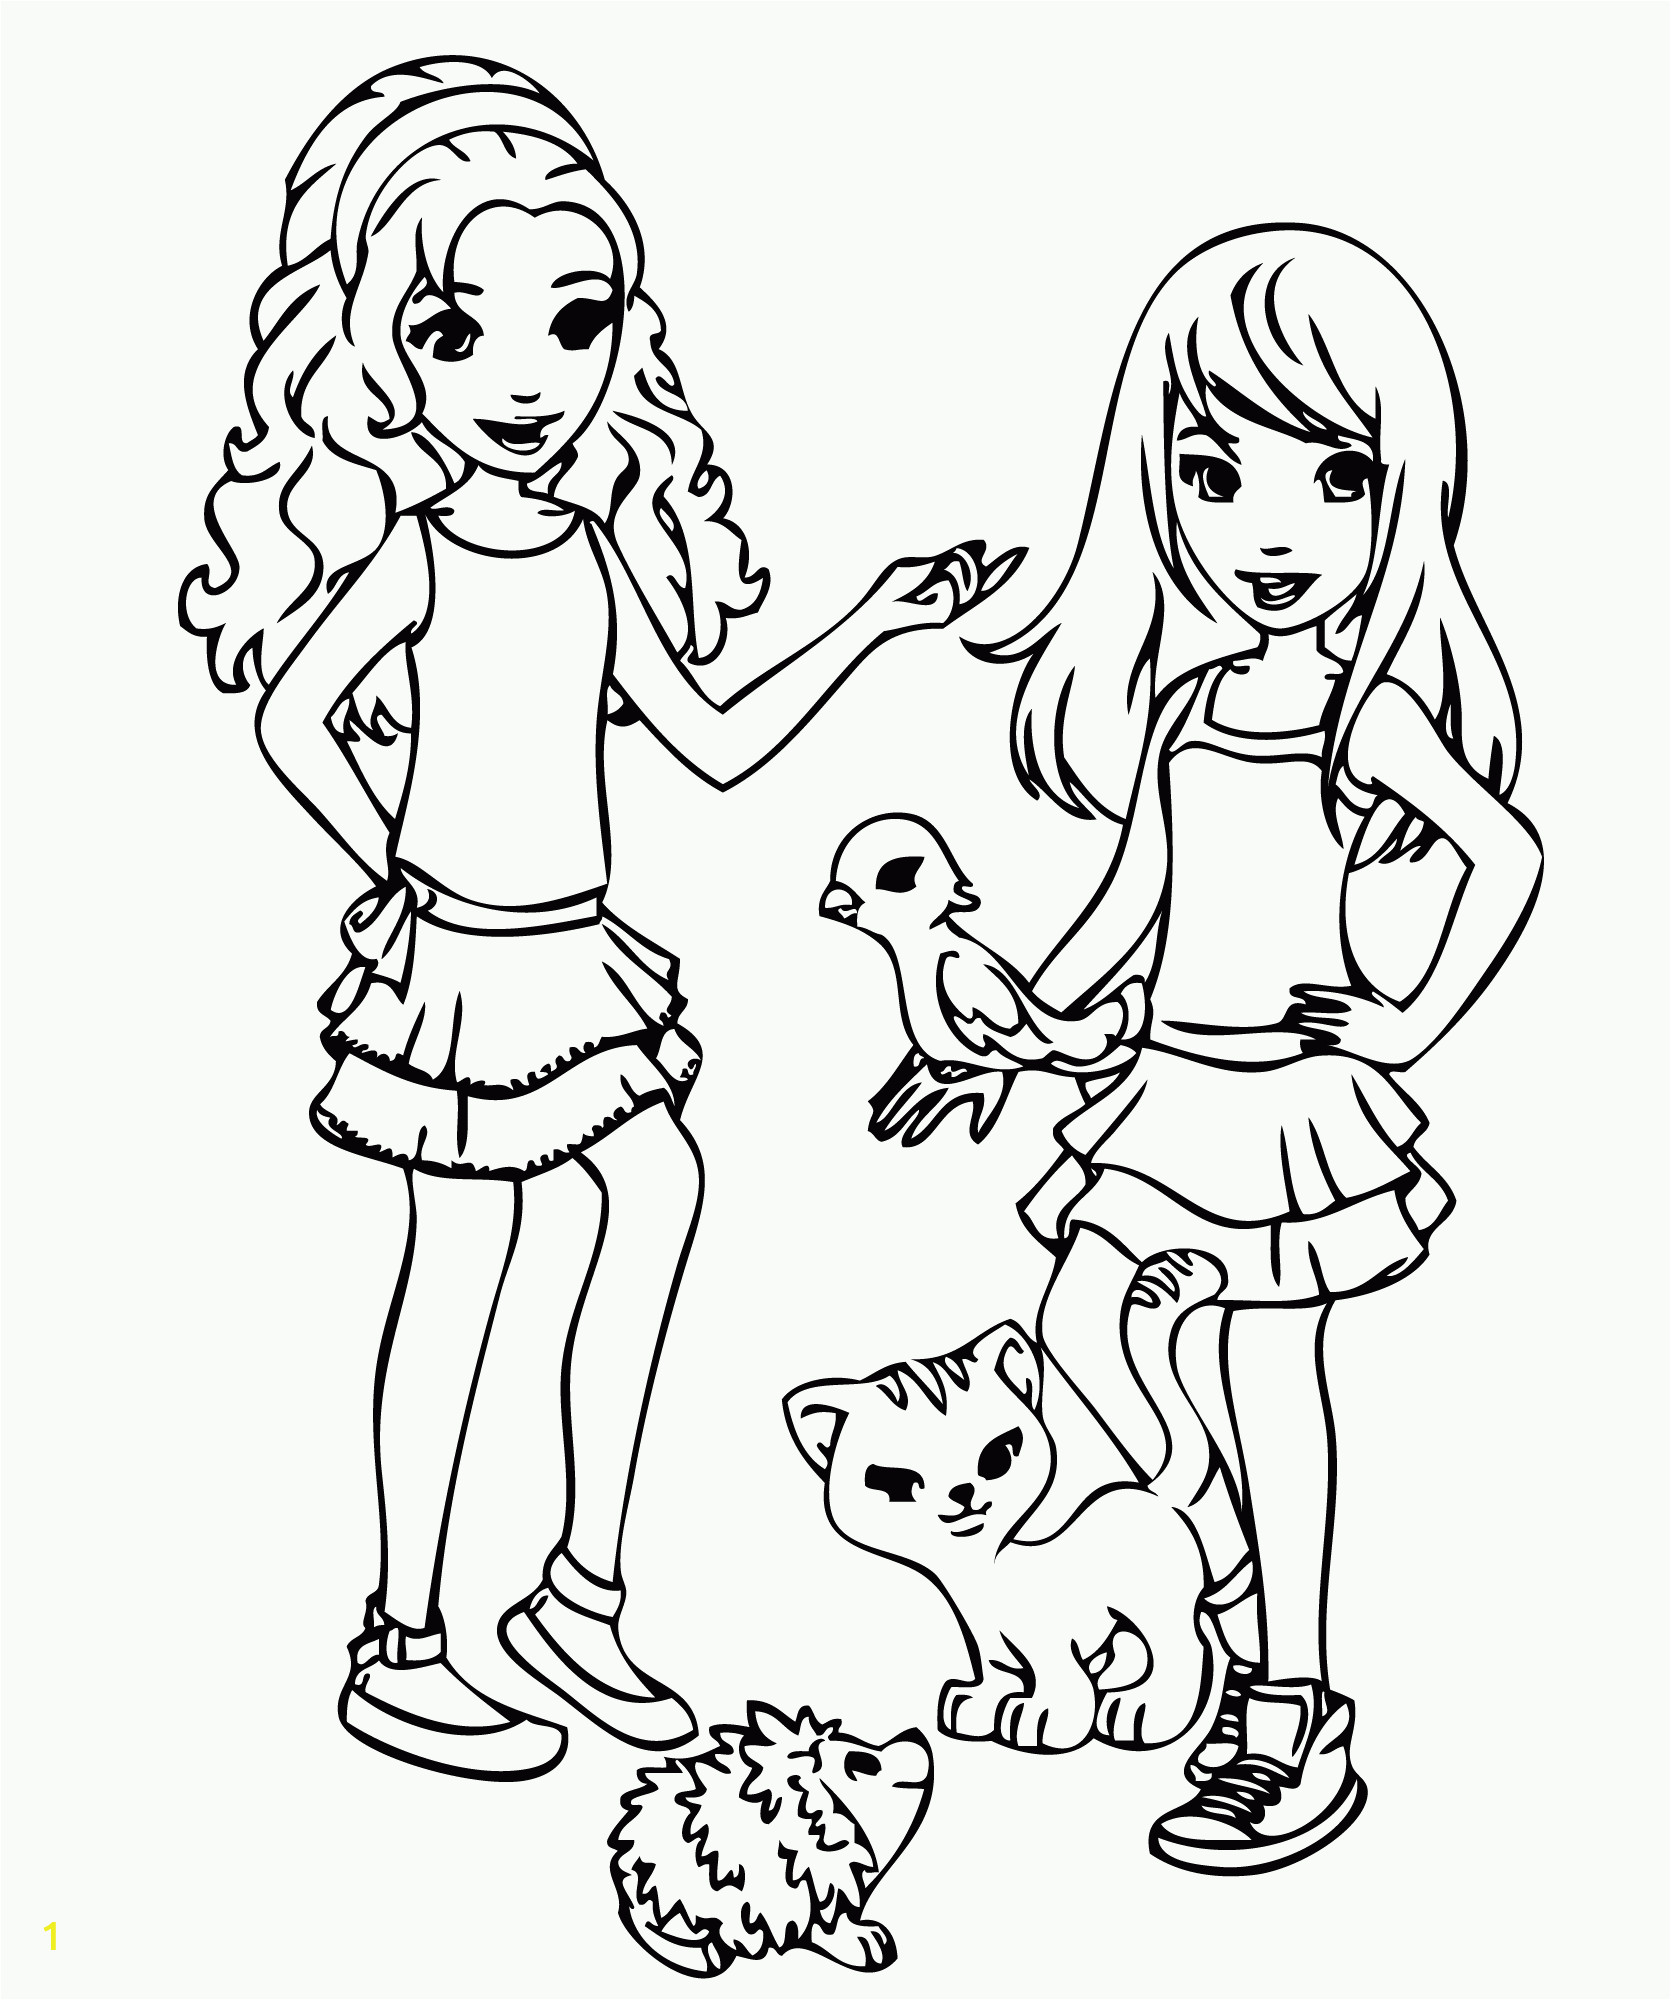 Lego Friends Coloring Pages to Print Lego Friends Coloring Pages Printable Free Coloring Home